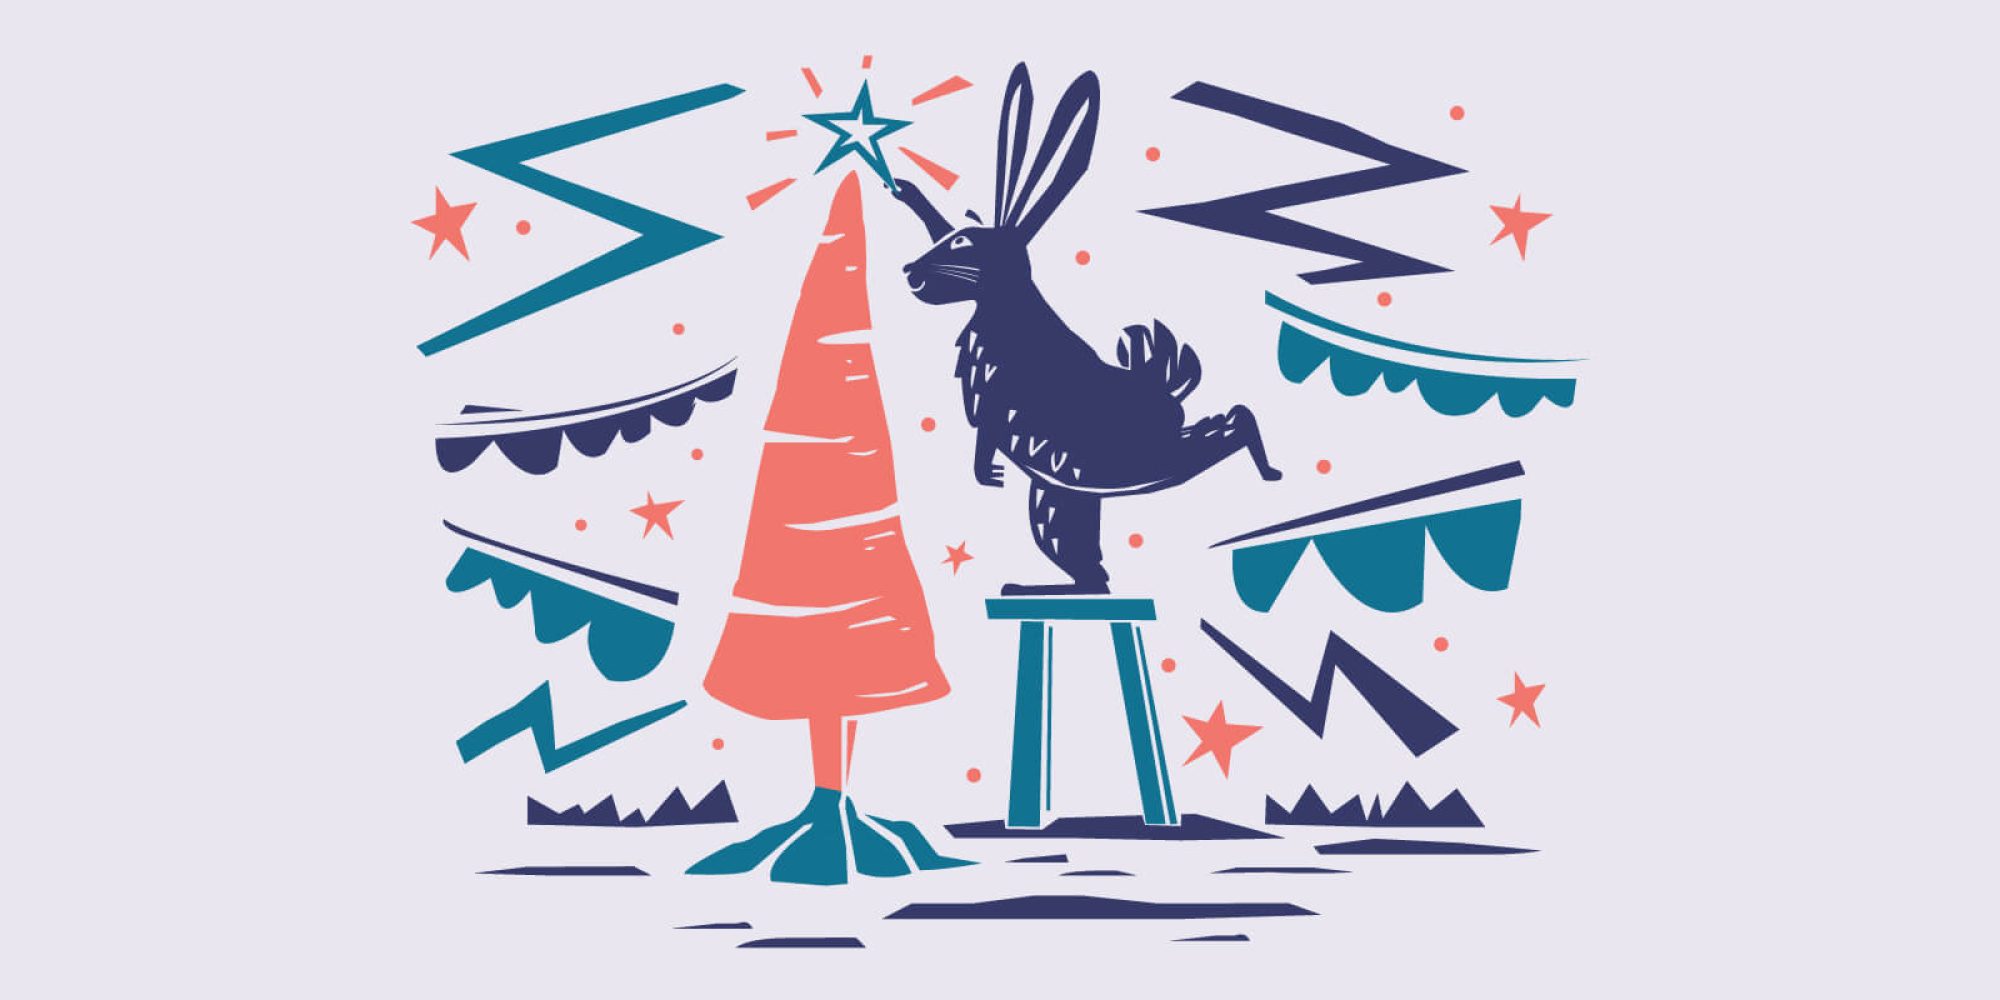 Illustration of a rabbit leaning on a stool to put a star on top of an upright carrot which appears as if a Christmas tree